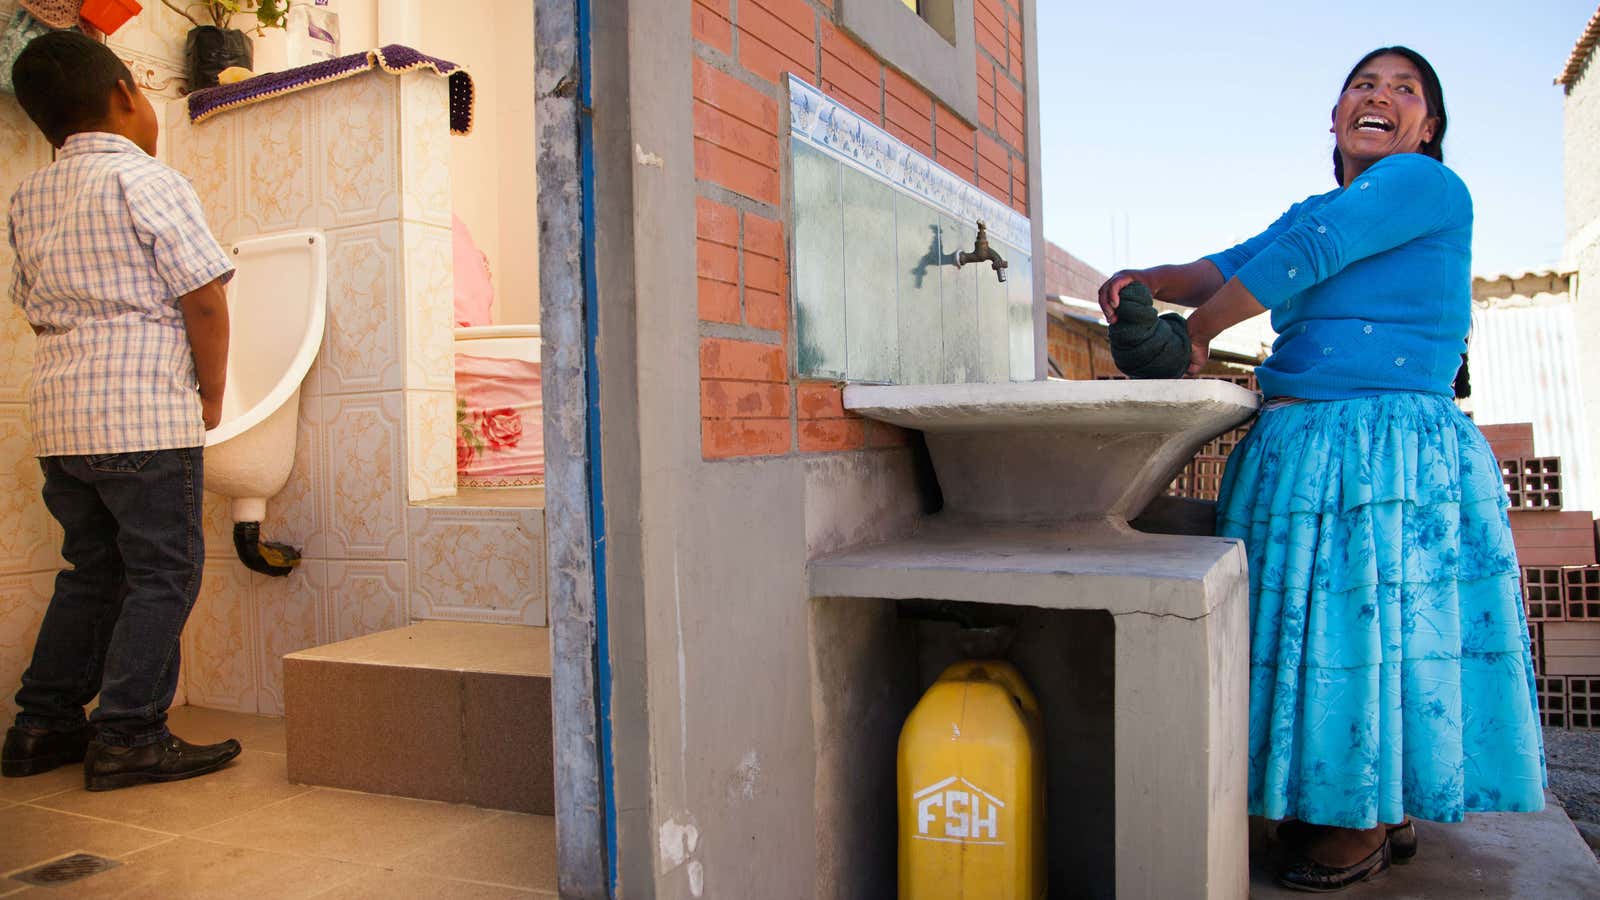 An eco-toilet (that doesn’t use water) in District 7 of El Alto, Bolivia